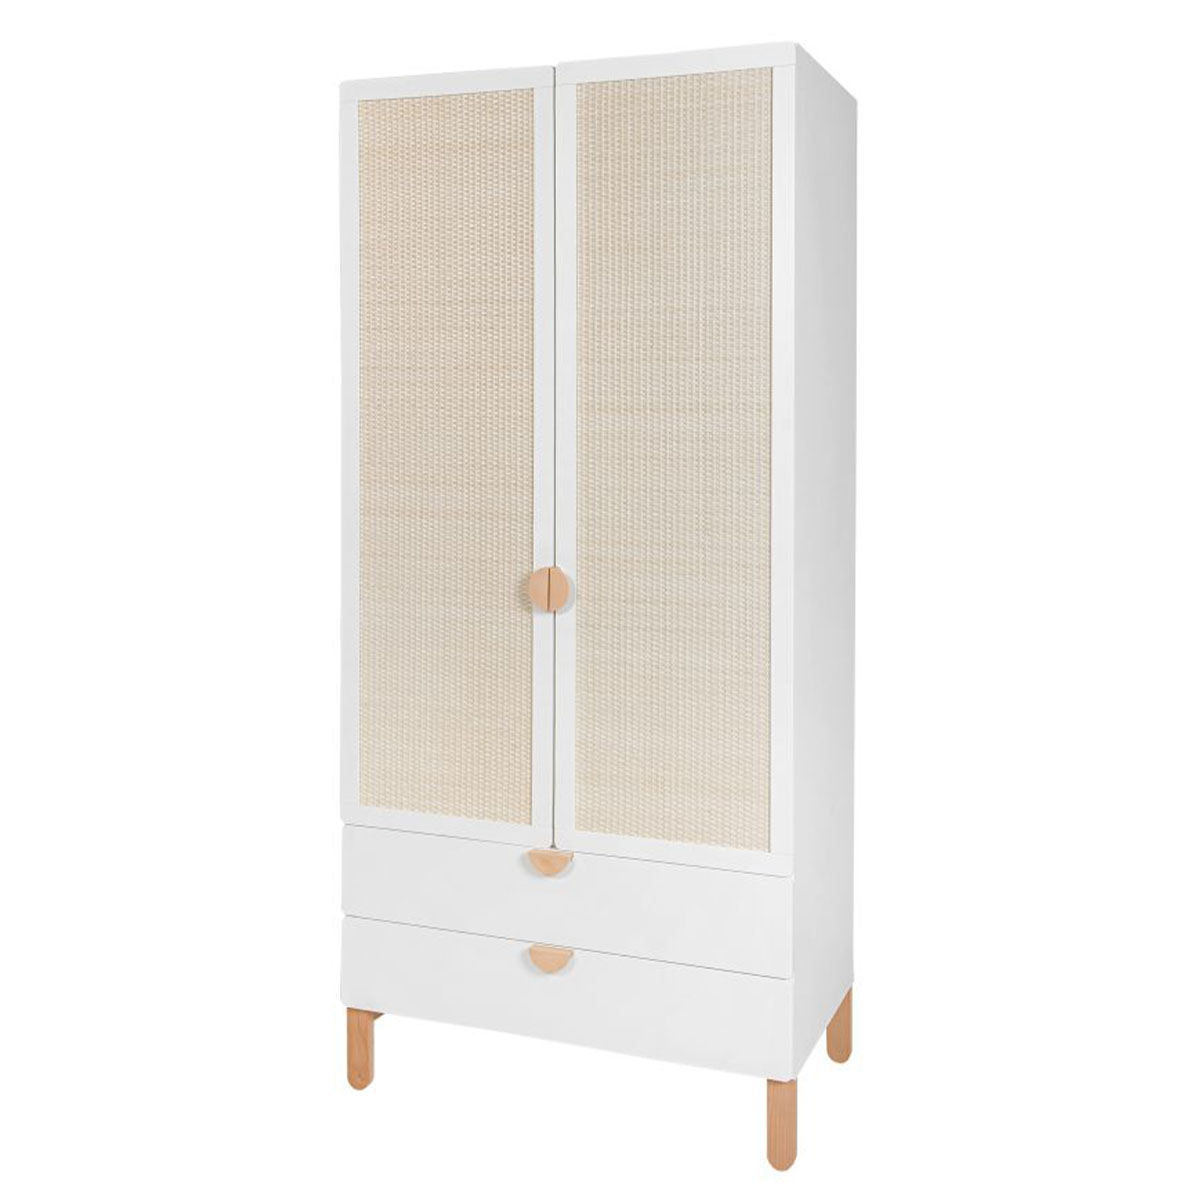 Bellamy_Laurie_armoire_1